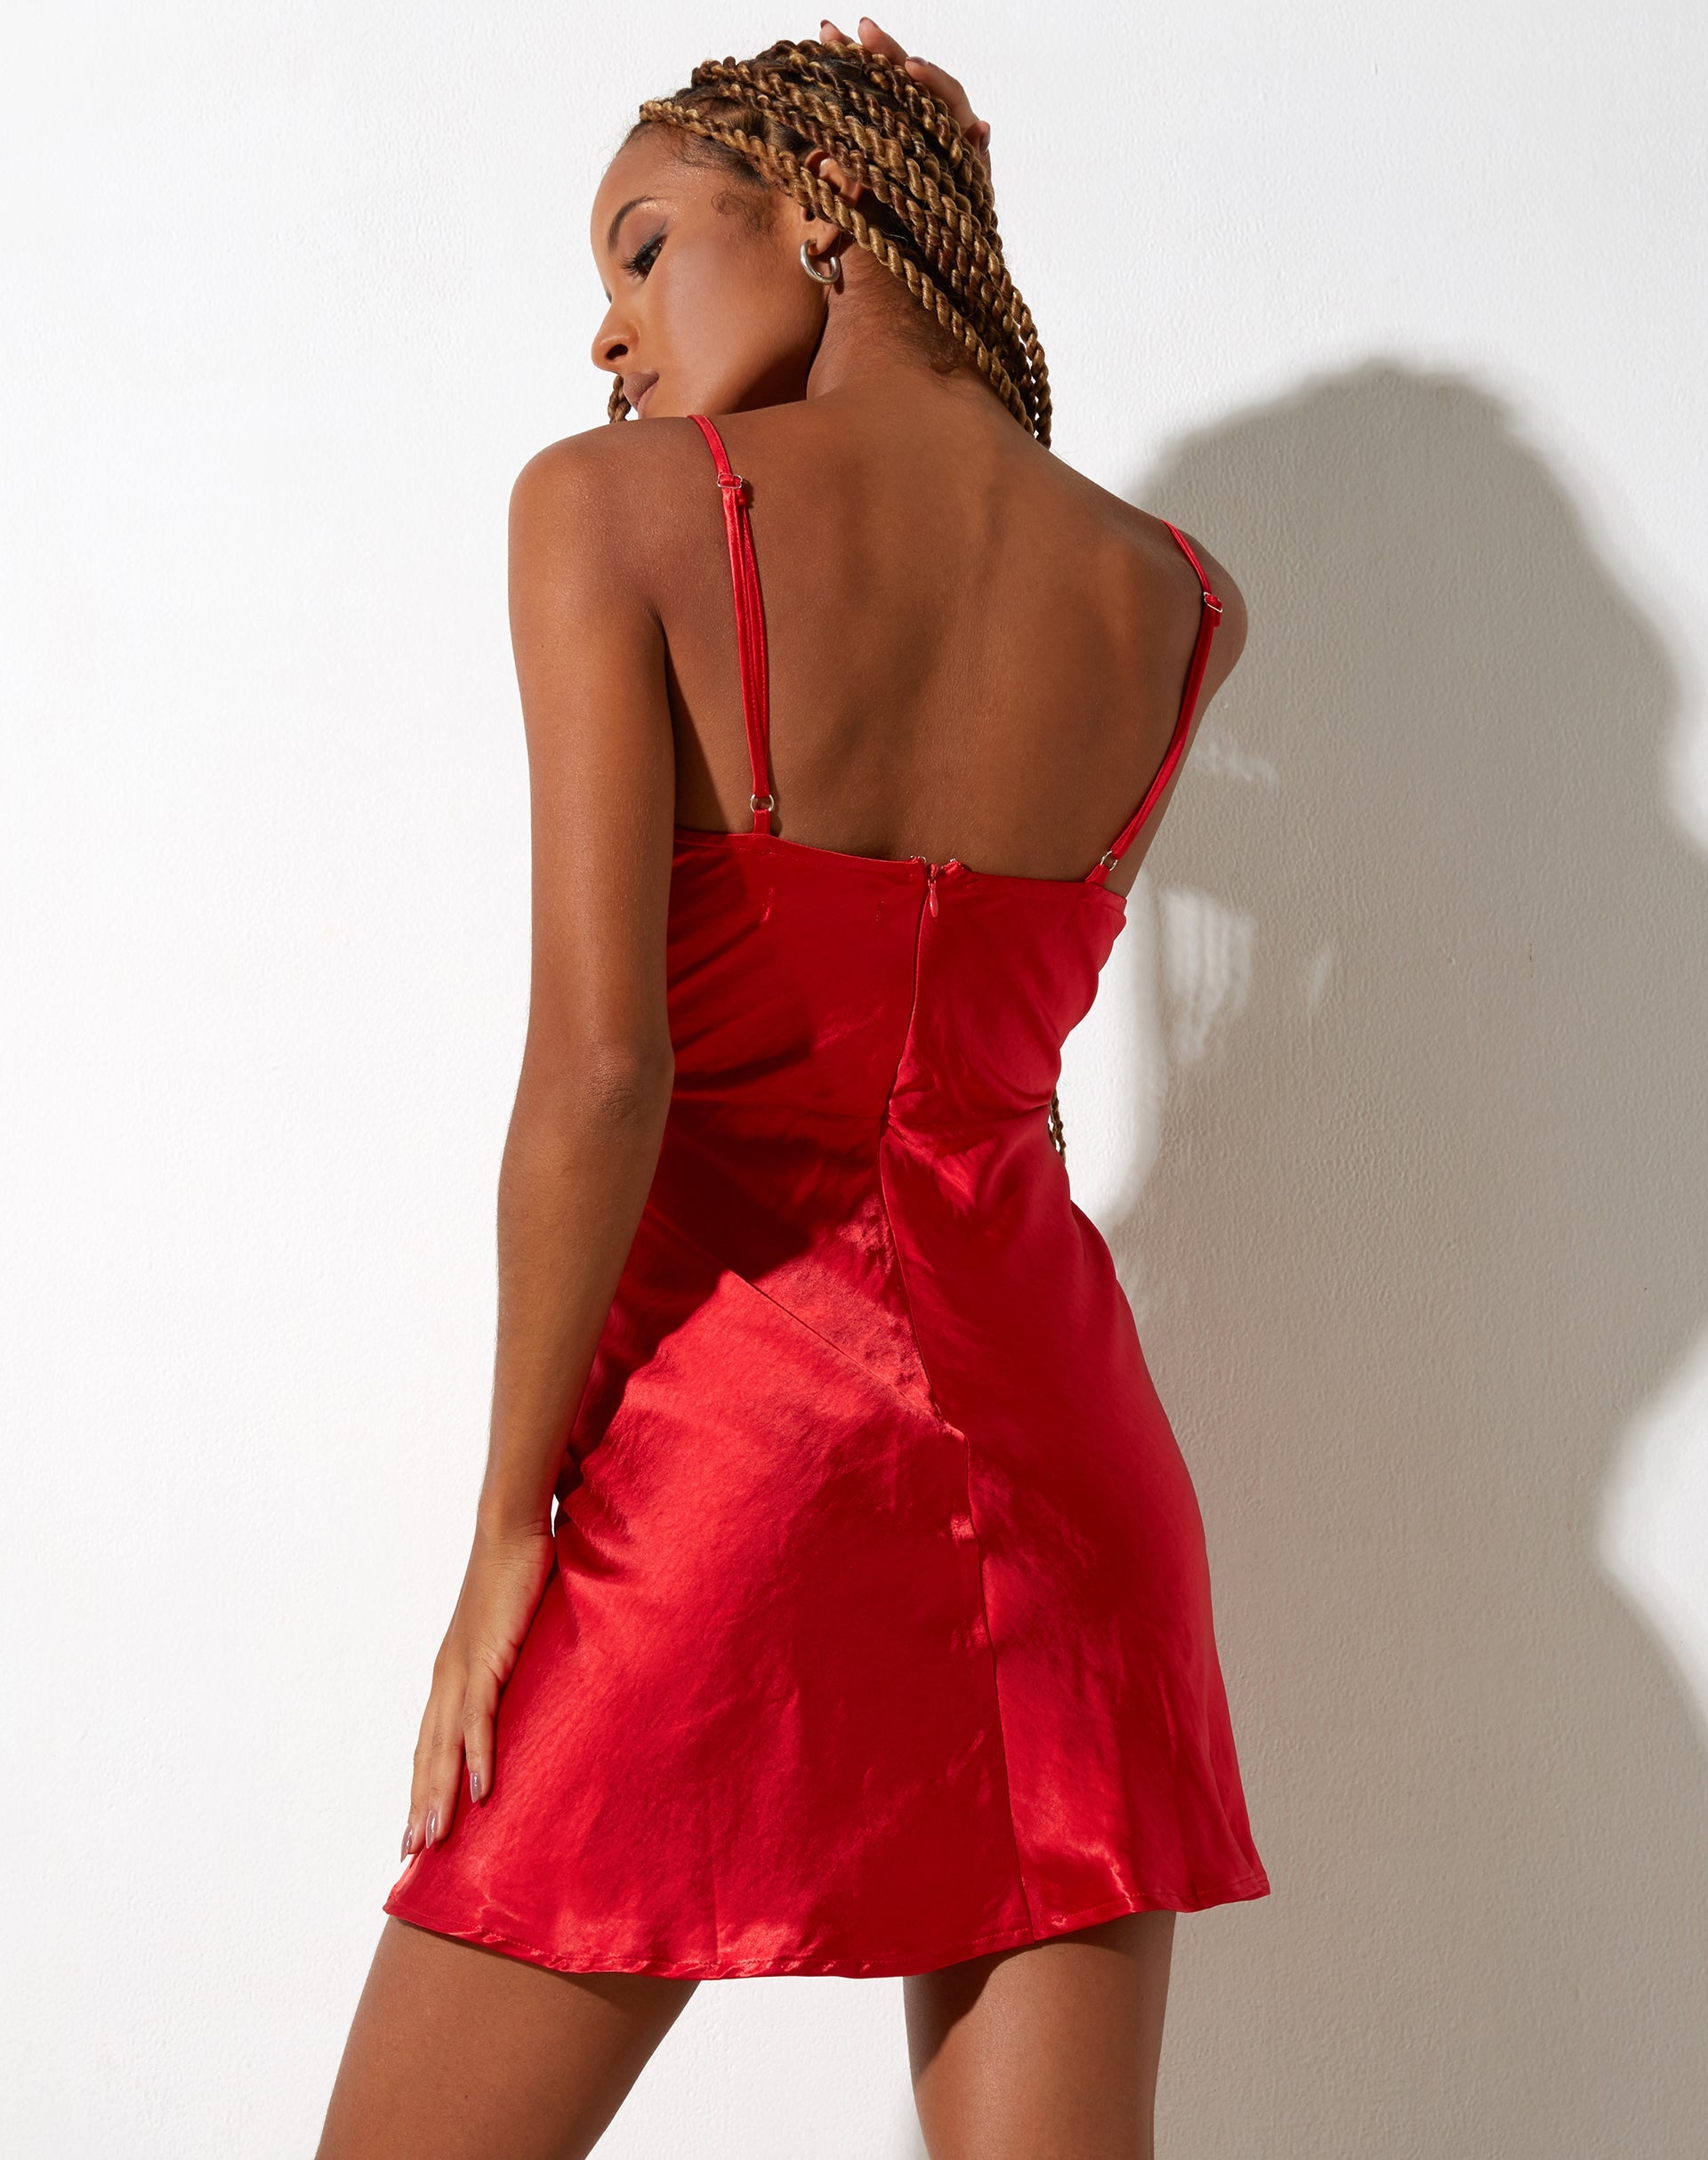 image of Lebby Mini Dress in Satin Red